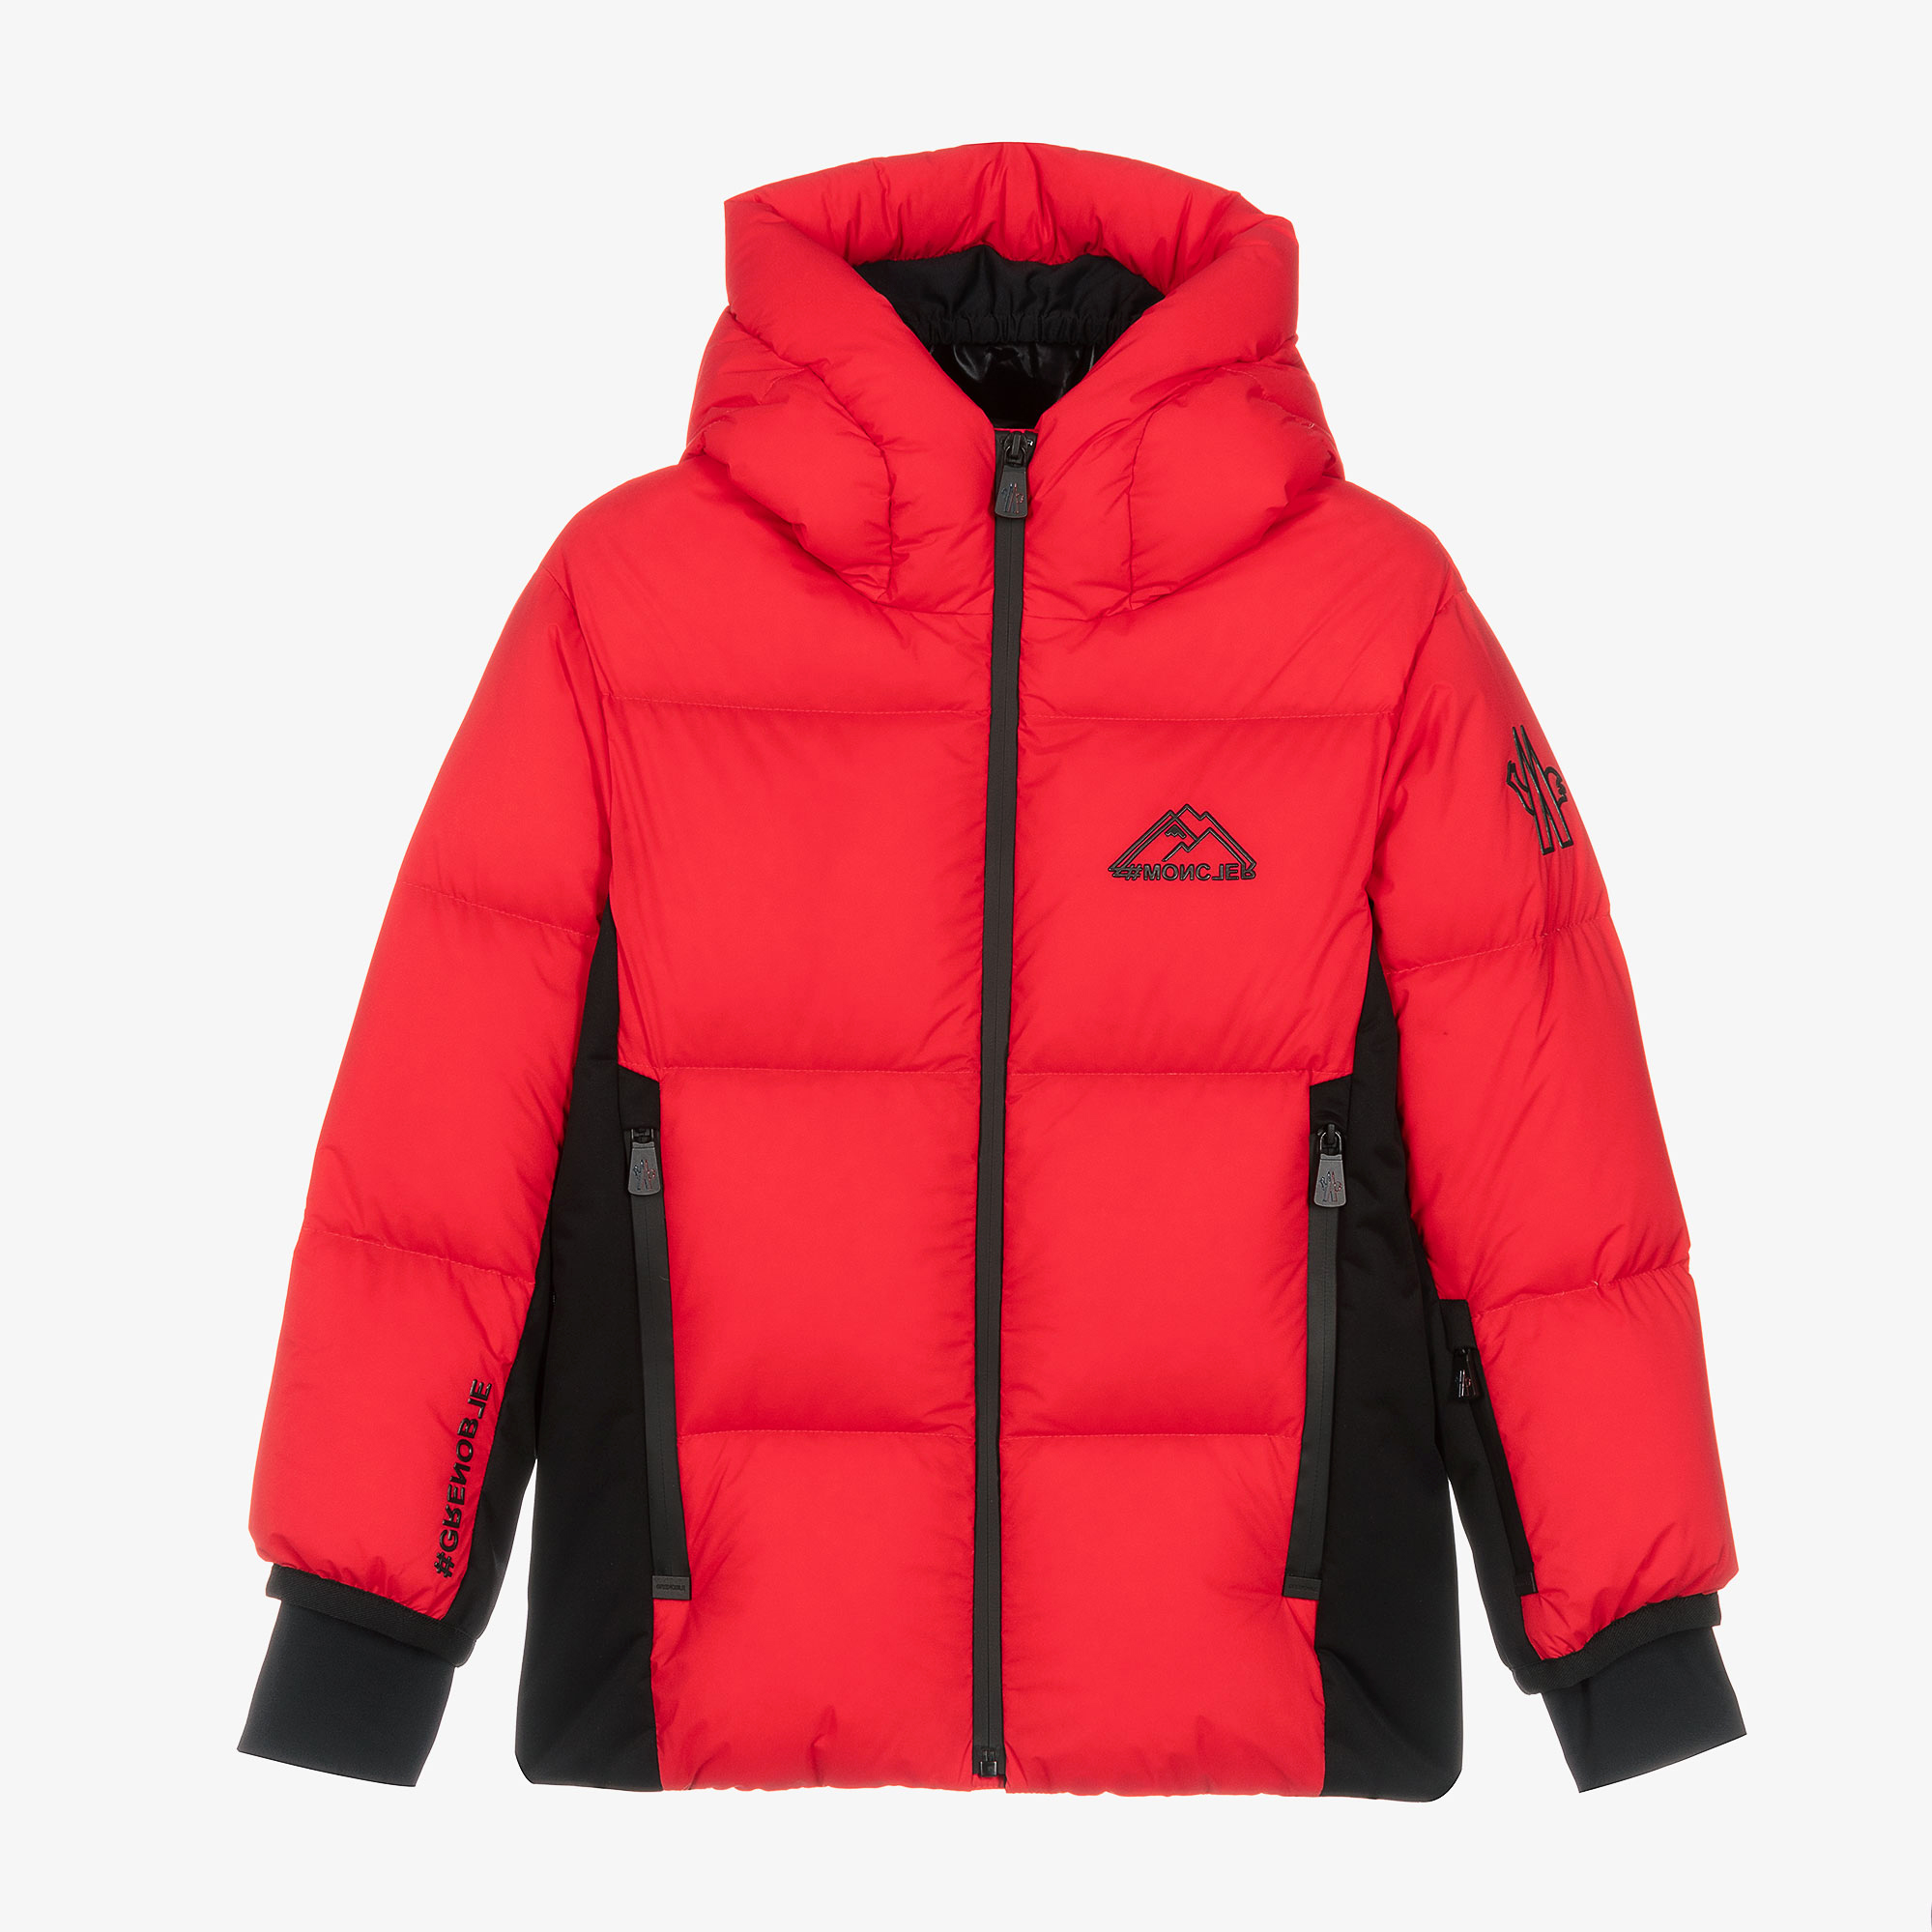 Montmiral down-filled jacket in red - Moncler Grenoble